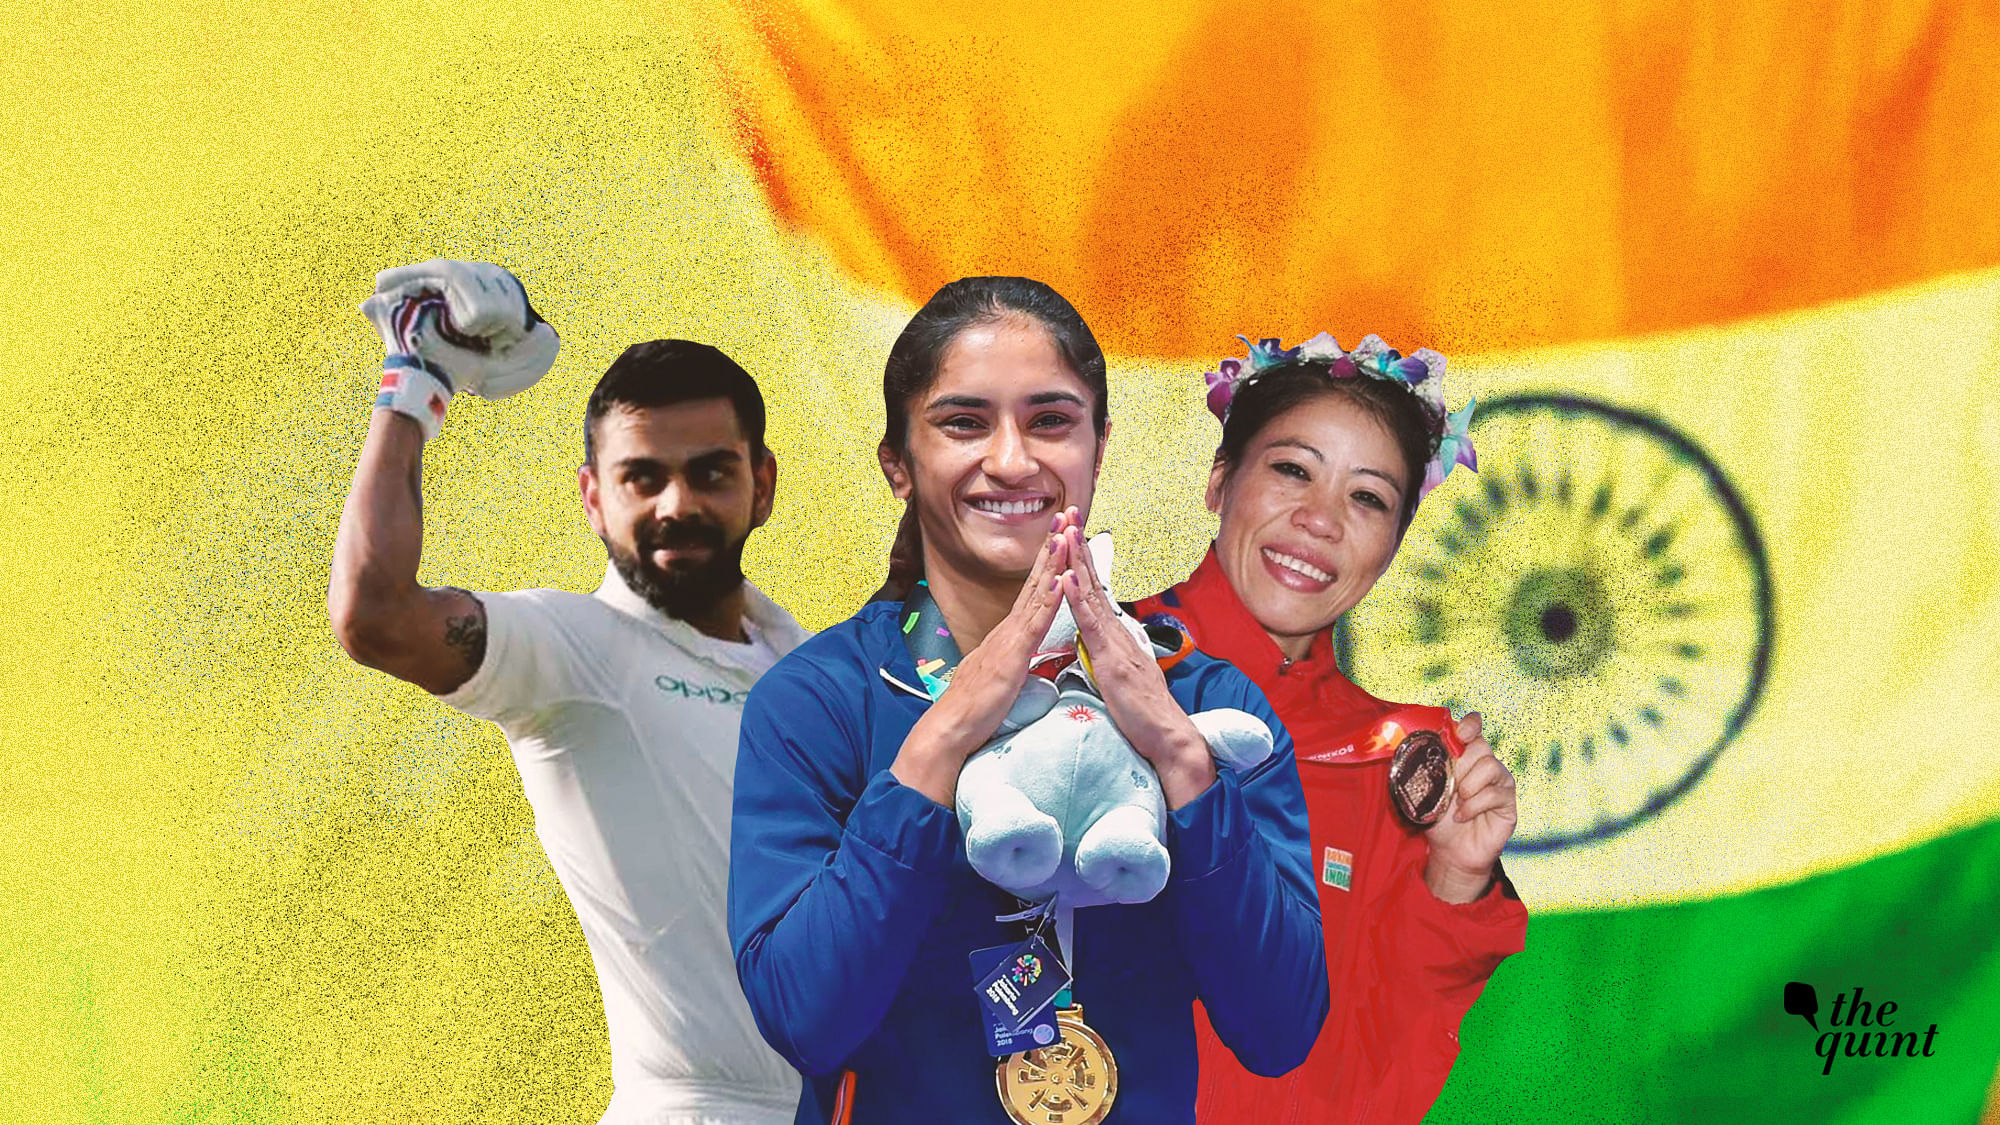 Here’s a recap of the 12 greatest Indian sporting moments in the last 12 months.